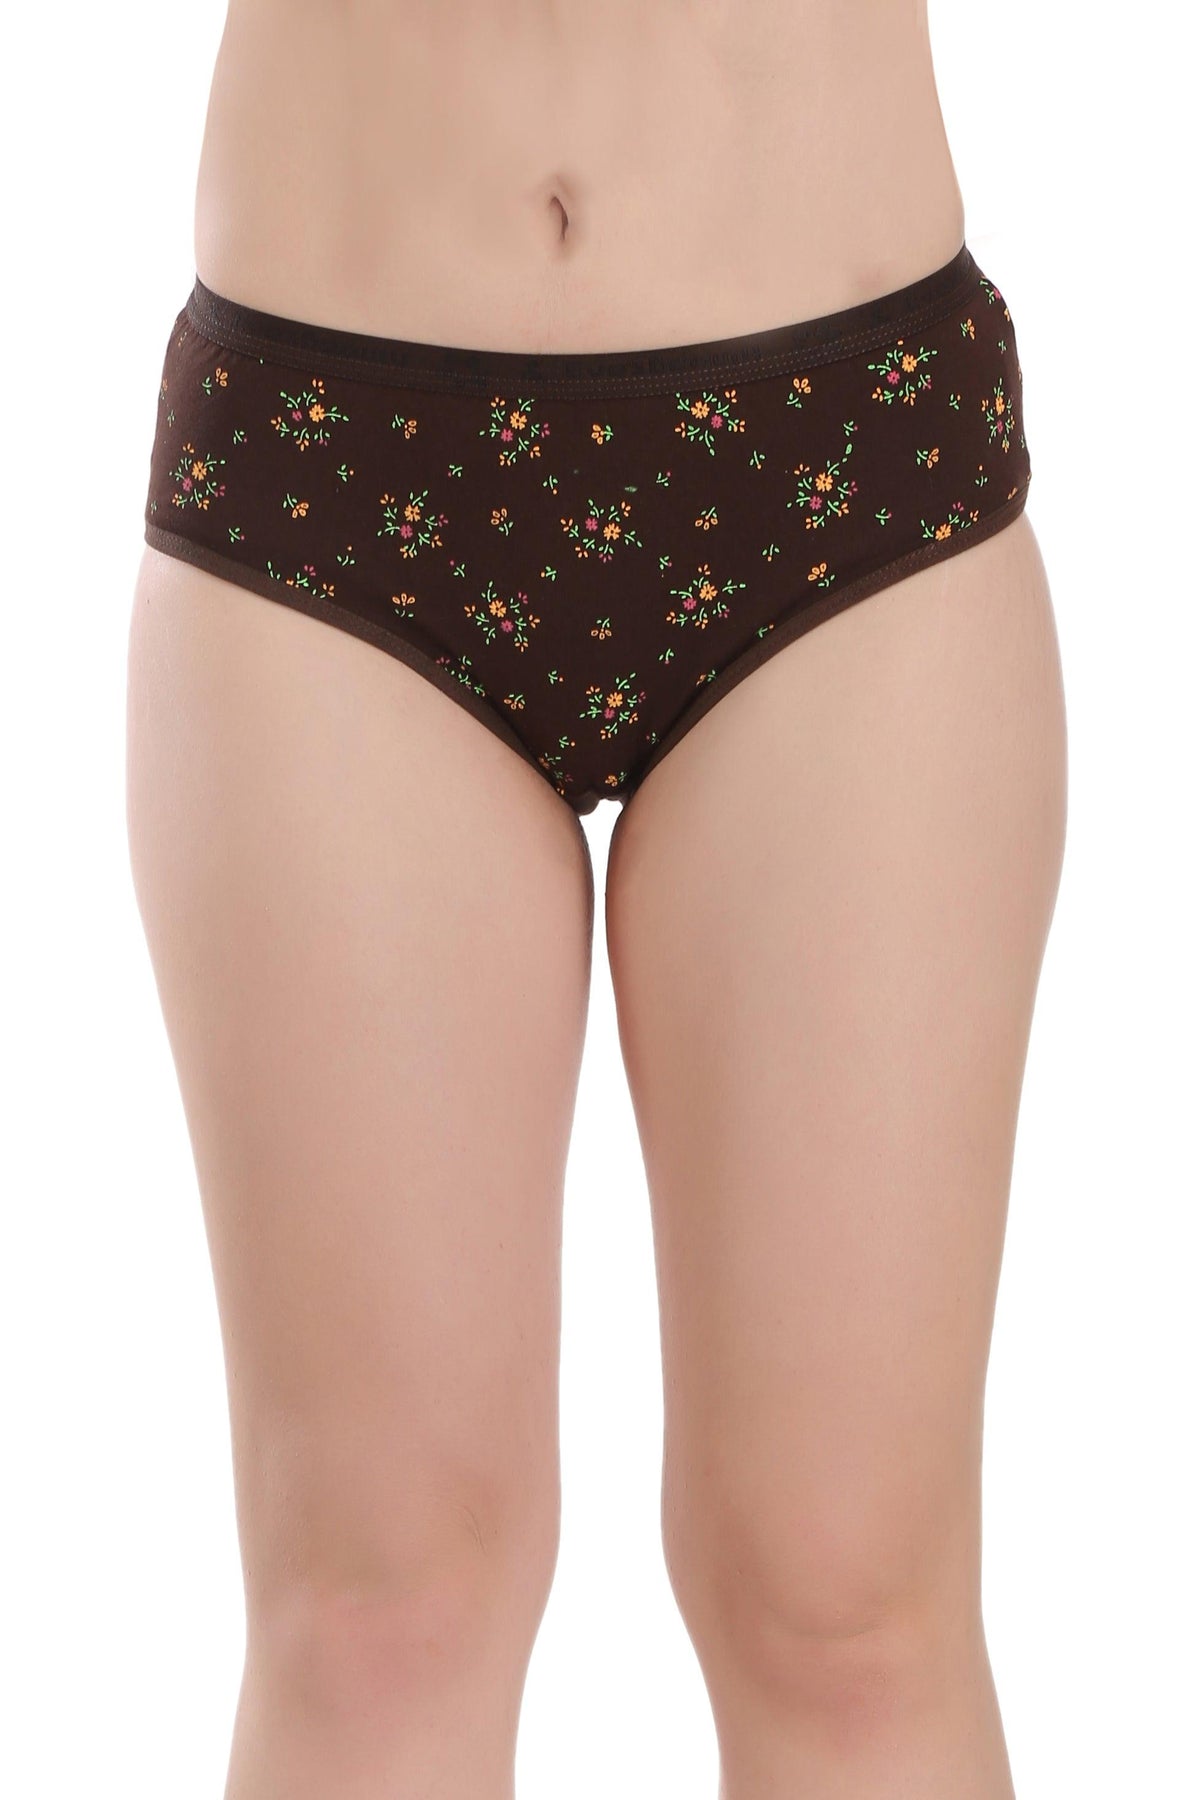 Menit Elita Women Hipster Multicolor Panty - Buy Multicolor Menit Elita  Women Hipster Multicolor Panty Online at Best Prices in India